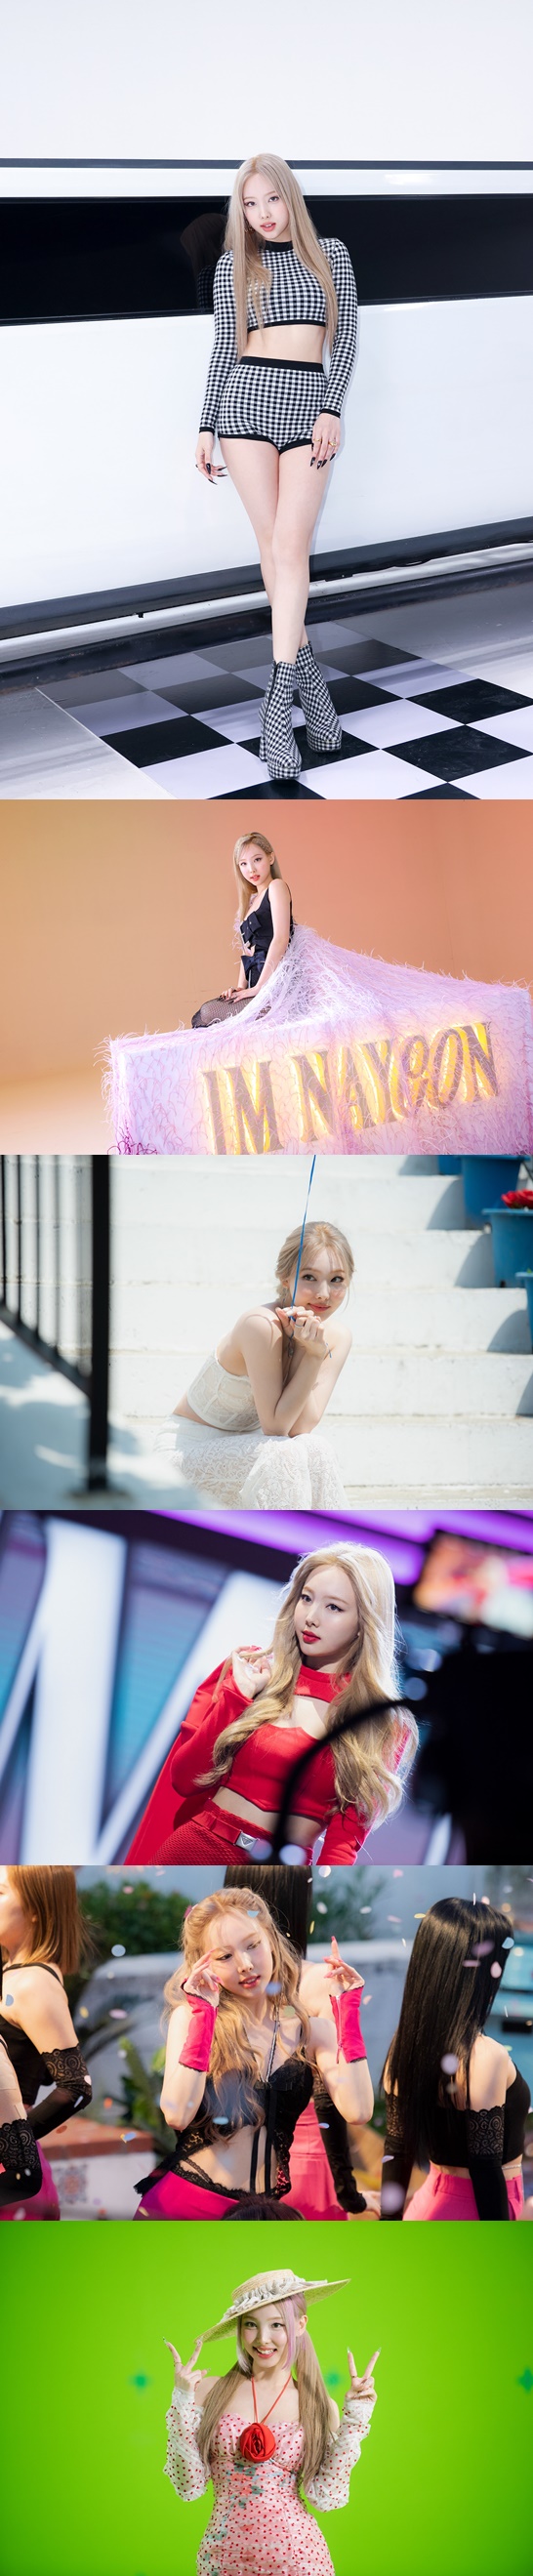 TWICE Nayeon has released a Music Video behind-the-scenes cut of the Solo debut song POP! (pop!).Nayeon released his first mini album IM NAYEON (IM Nayeon) and the title song POP! at 1 p.m. on the 24th and debuted it as Solo The Artist.This album, which is meaningful as TWICEs first solo album, has the meaning of im Nayeon and IM NAYEON, which means I am Nayeon, and it gives fans a different pleasure by participating in solo songwriting, TWICE release album first other The Artist featuring song.The new song POP! The movie added a cool background that goes well with summer, a popping visual effect, and Nayeons brilliant visuals.Nayeon in the open movie scene emanated a unique juice with a bright smile and showed off his pop star with charismatic eyes and imposing pose.In addition, a variety of styling such as checkered costumes, dresses reminiscent of goddesses, and wide-brimmed hats were completely digested, filling the movie with a Nayeon-like charm.POP! The movie, which announced the birth of 2022 Summer Queen, exceeded 20 million views on YouTube on the afternoon of the 25th, and exceeded 28.25 million views at 1 pm on the 27th.Nayeons Solo debut song POP!Is a song full of bright and pleasant energy, and it was completed by famous writers such as Kenji (KENZIE), London Noise (LDN Noise), and Isran.It features a fascinating message that will burst the mind of a bubble-blown opponent and an addictive melody.Mini 1 IM NAYEON is achieving a record in various charts both at home and abroad.Shinbo won the iTunes album charts in 14 overseas regions including Brazil and Spain at 6 pm on the 25th, and Apple Music album charts in 11 overseas regions including Japan and Singapore.On the 25th from the day of the release of the album, he won the chart of the Hanter chart daily chart and the Gaon chart retail album daily chart.On the 25th, he appeared on the popular American music program MTV Fresh Out Live (MTV Fresh Out Love Live!) and released his new song POP!Performance was presented, and at 11 pm on the same day, performance video [BE ORIGINAL] NAYEON POP!and released it.For Nayeon, who showed a charm of pale color in different stages as well as powerful performance, viewers received favorable reviews such as a pleasant stage where fresh fruit is thought, Performance is exciting, a butterfly dance line.Nayeon is Love Live, which commemorates the release of his first Solo mini album!I hope you will enjoy it as much as you can as it is a hard-earned album, and I hope you will be expecting a lot of future activities.The mini-album IM NAYEON, which has its own charm, focuses on the Solo The Artist Nayeon, which will fly more vigorously.Photo: JYP Entertainment